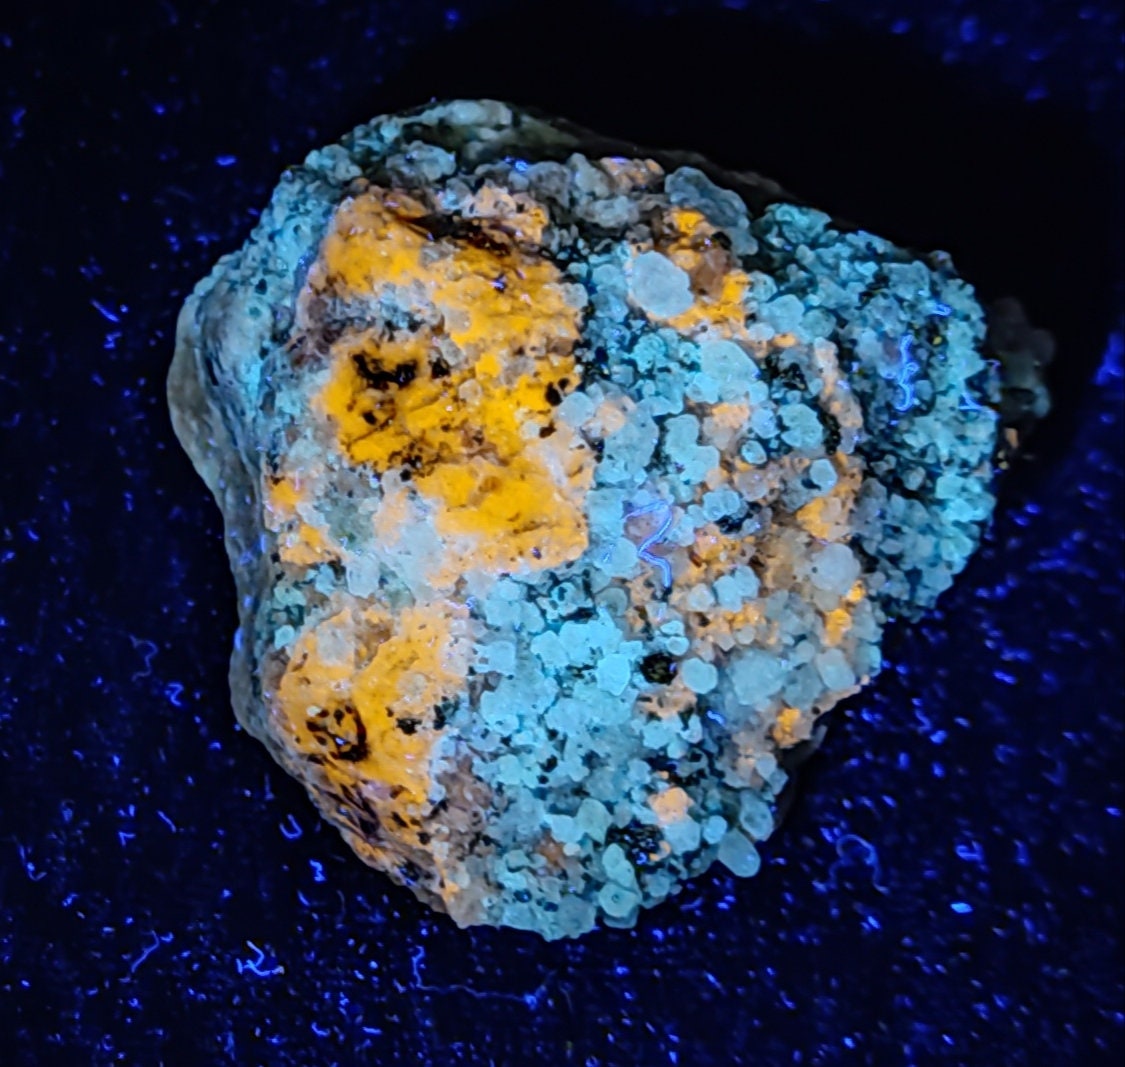 Afghanite Fluorescent in matrix with some pyrite calcite 88 grams